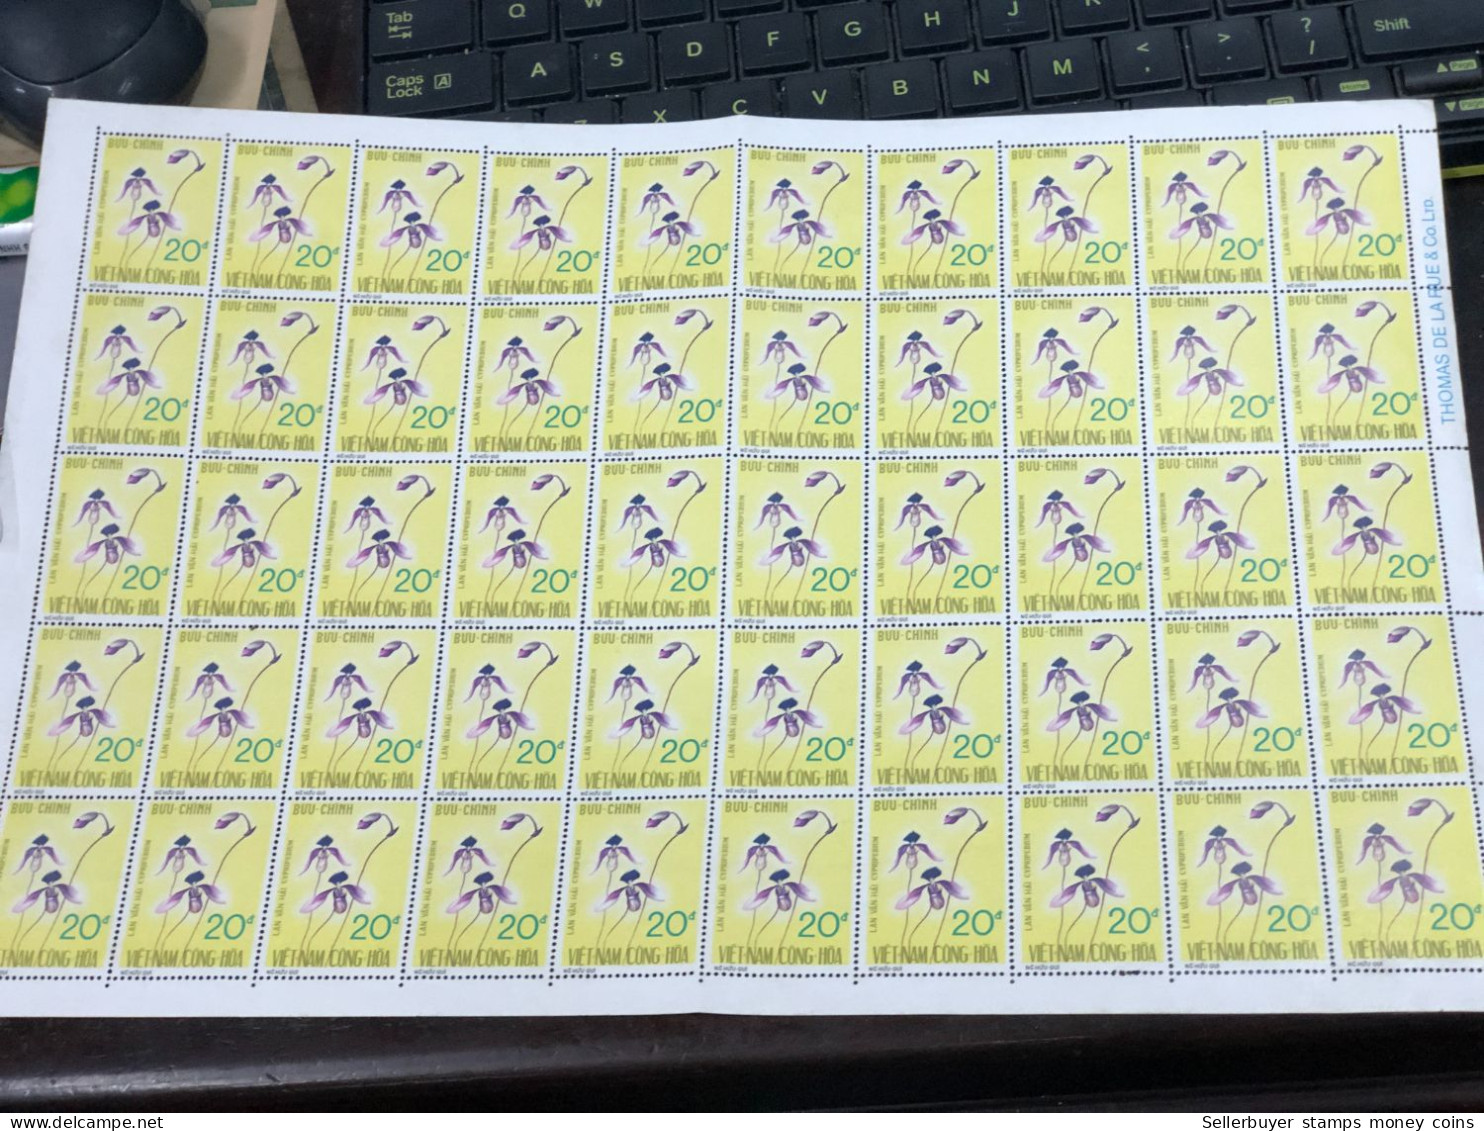 Vietnam South Sheet Stamps Before 1975(20$ Orchidees 1974) 1 Pcs 50 Stamps Quality Good - Viêt-Nam